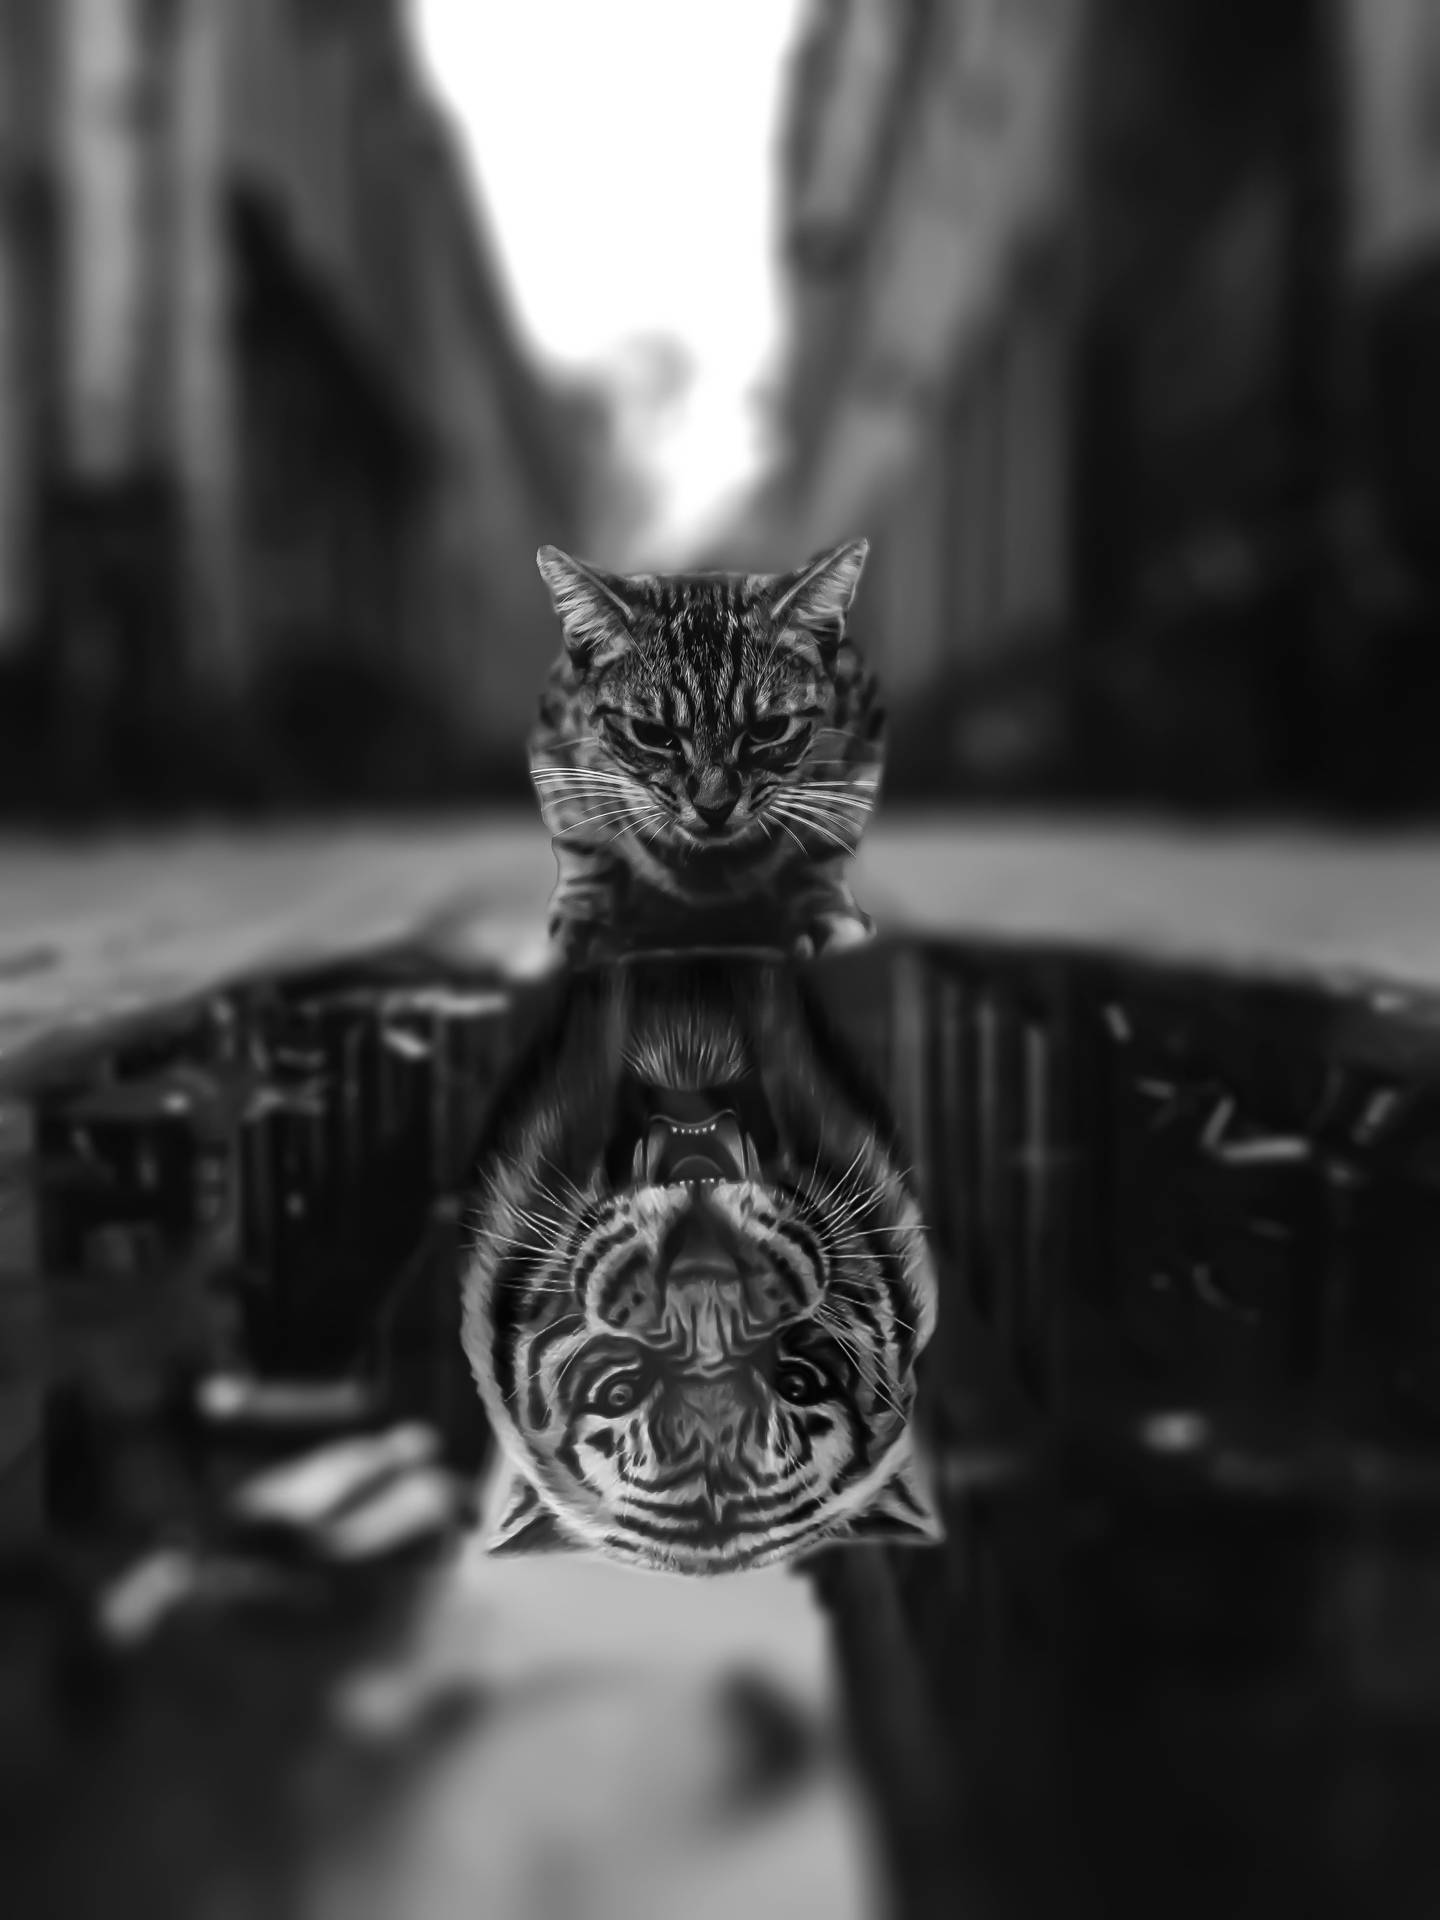 Black Tiger In The Reflection